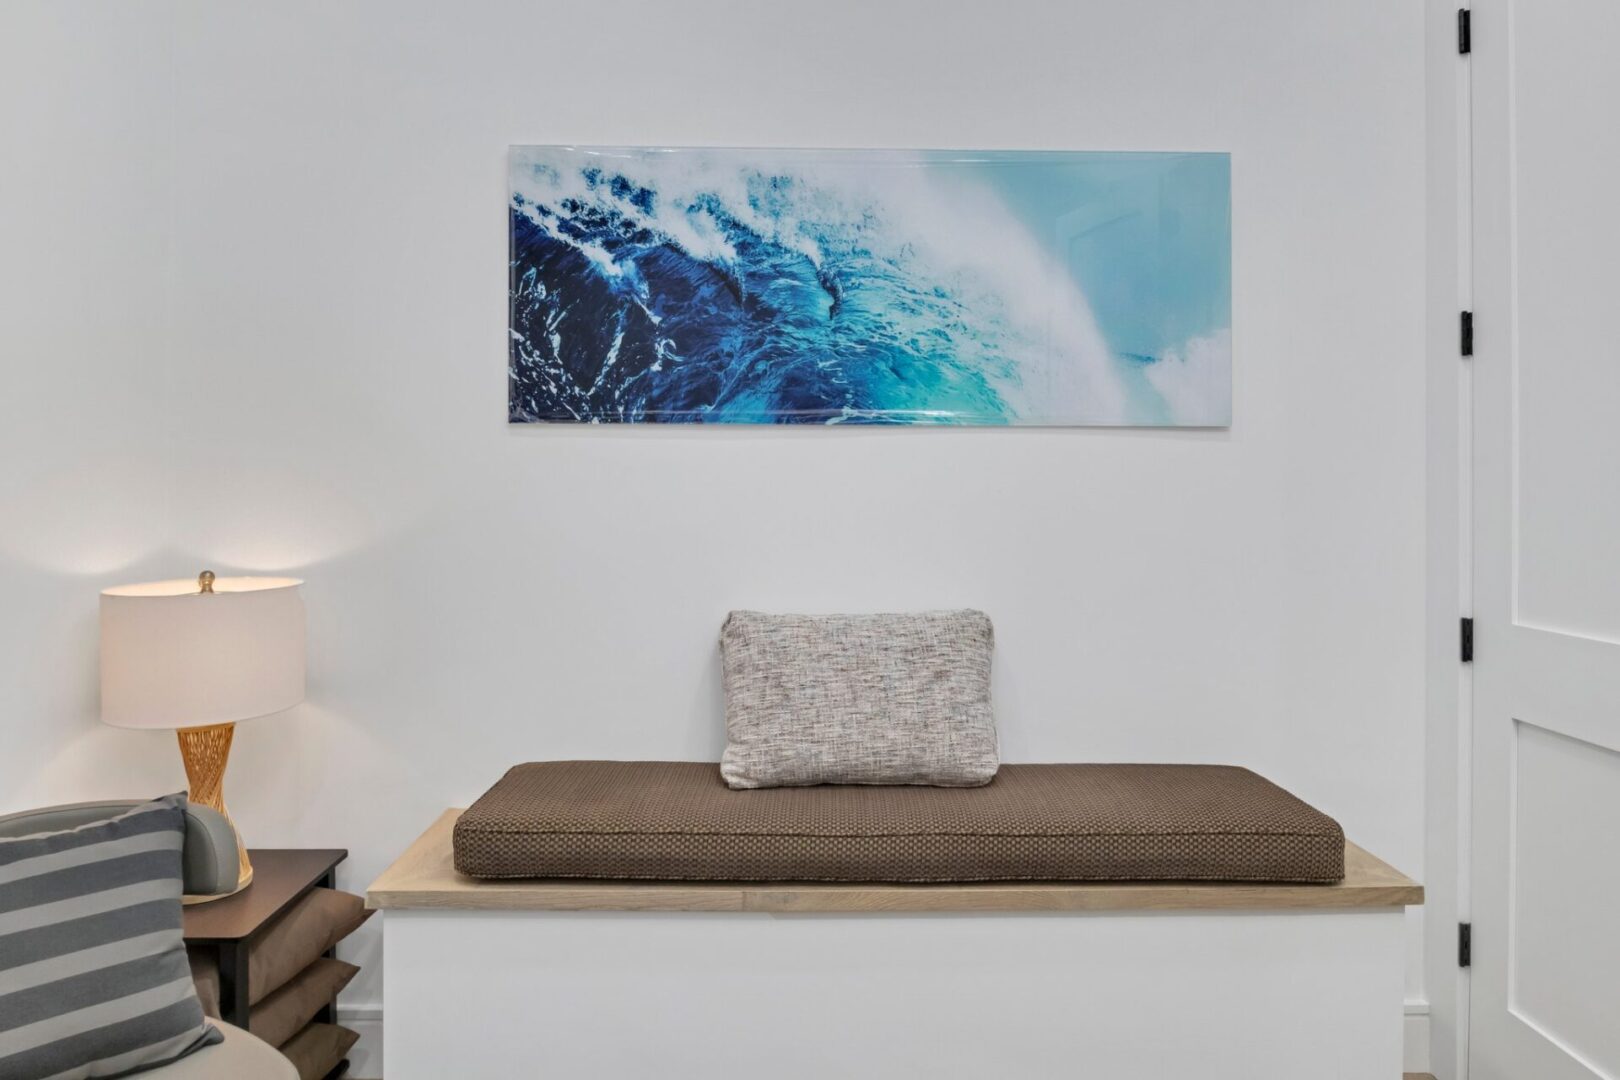 A large picture of the ocean hanging on the wall.